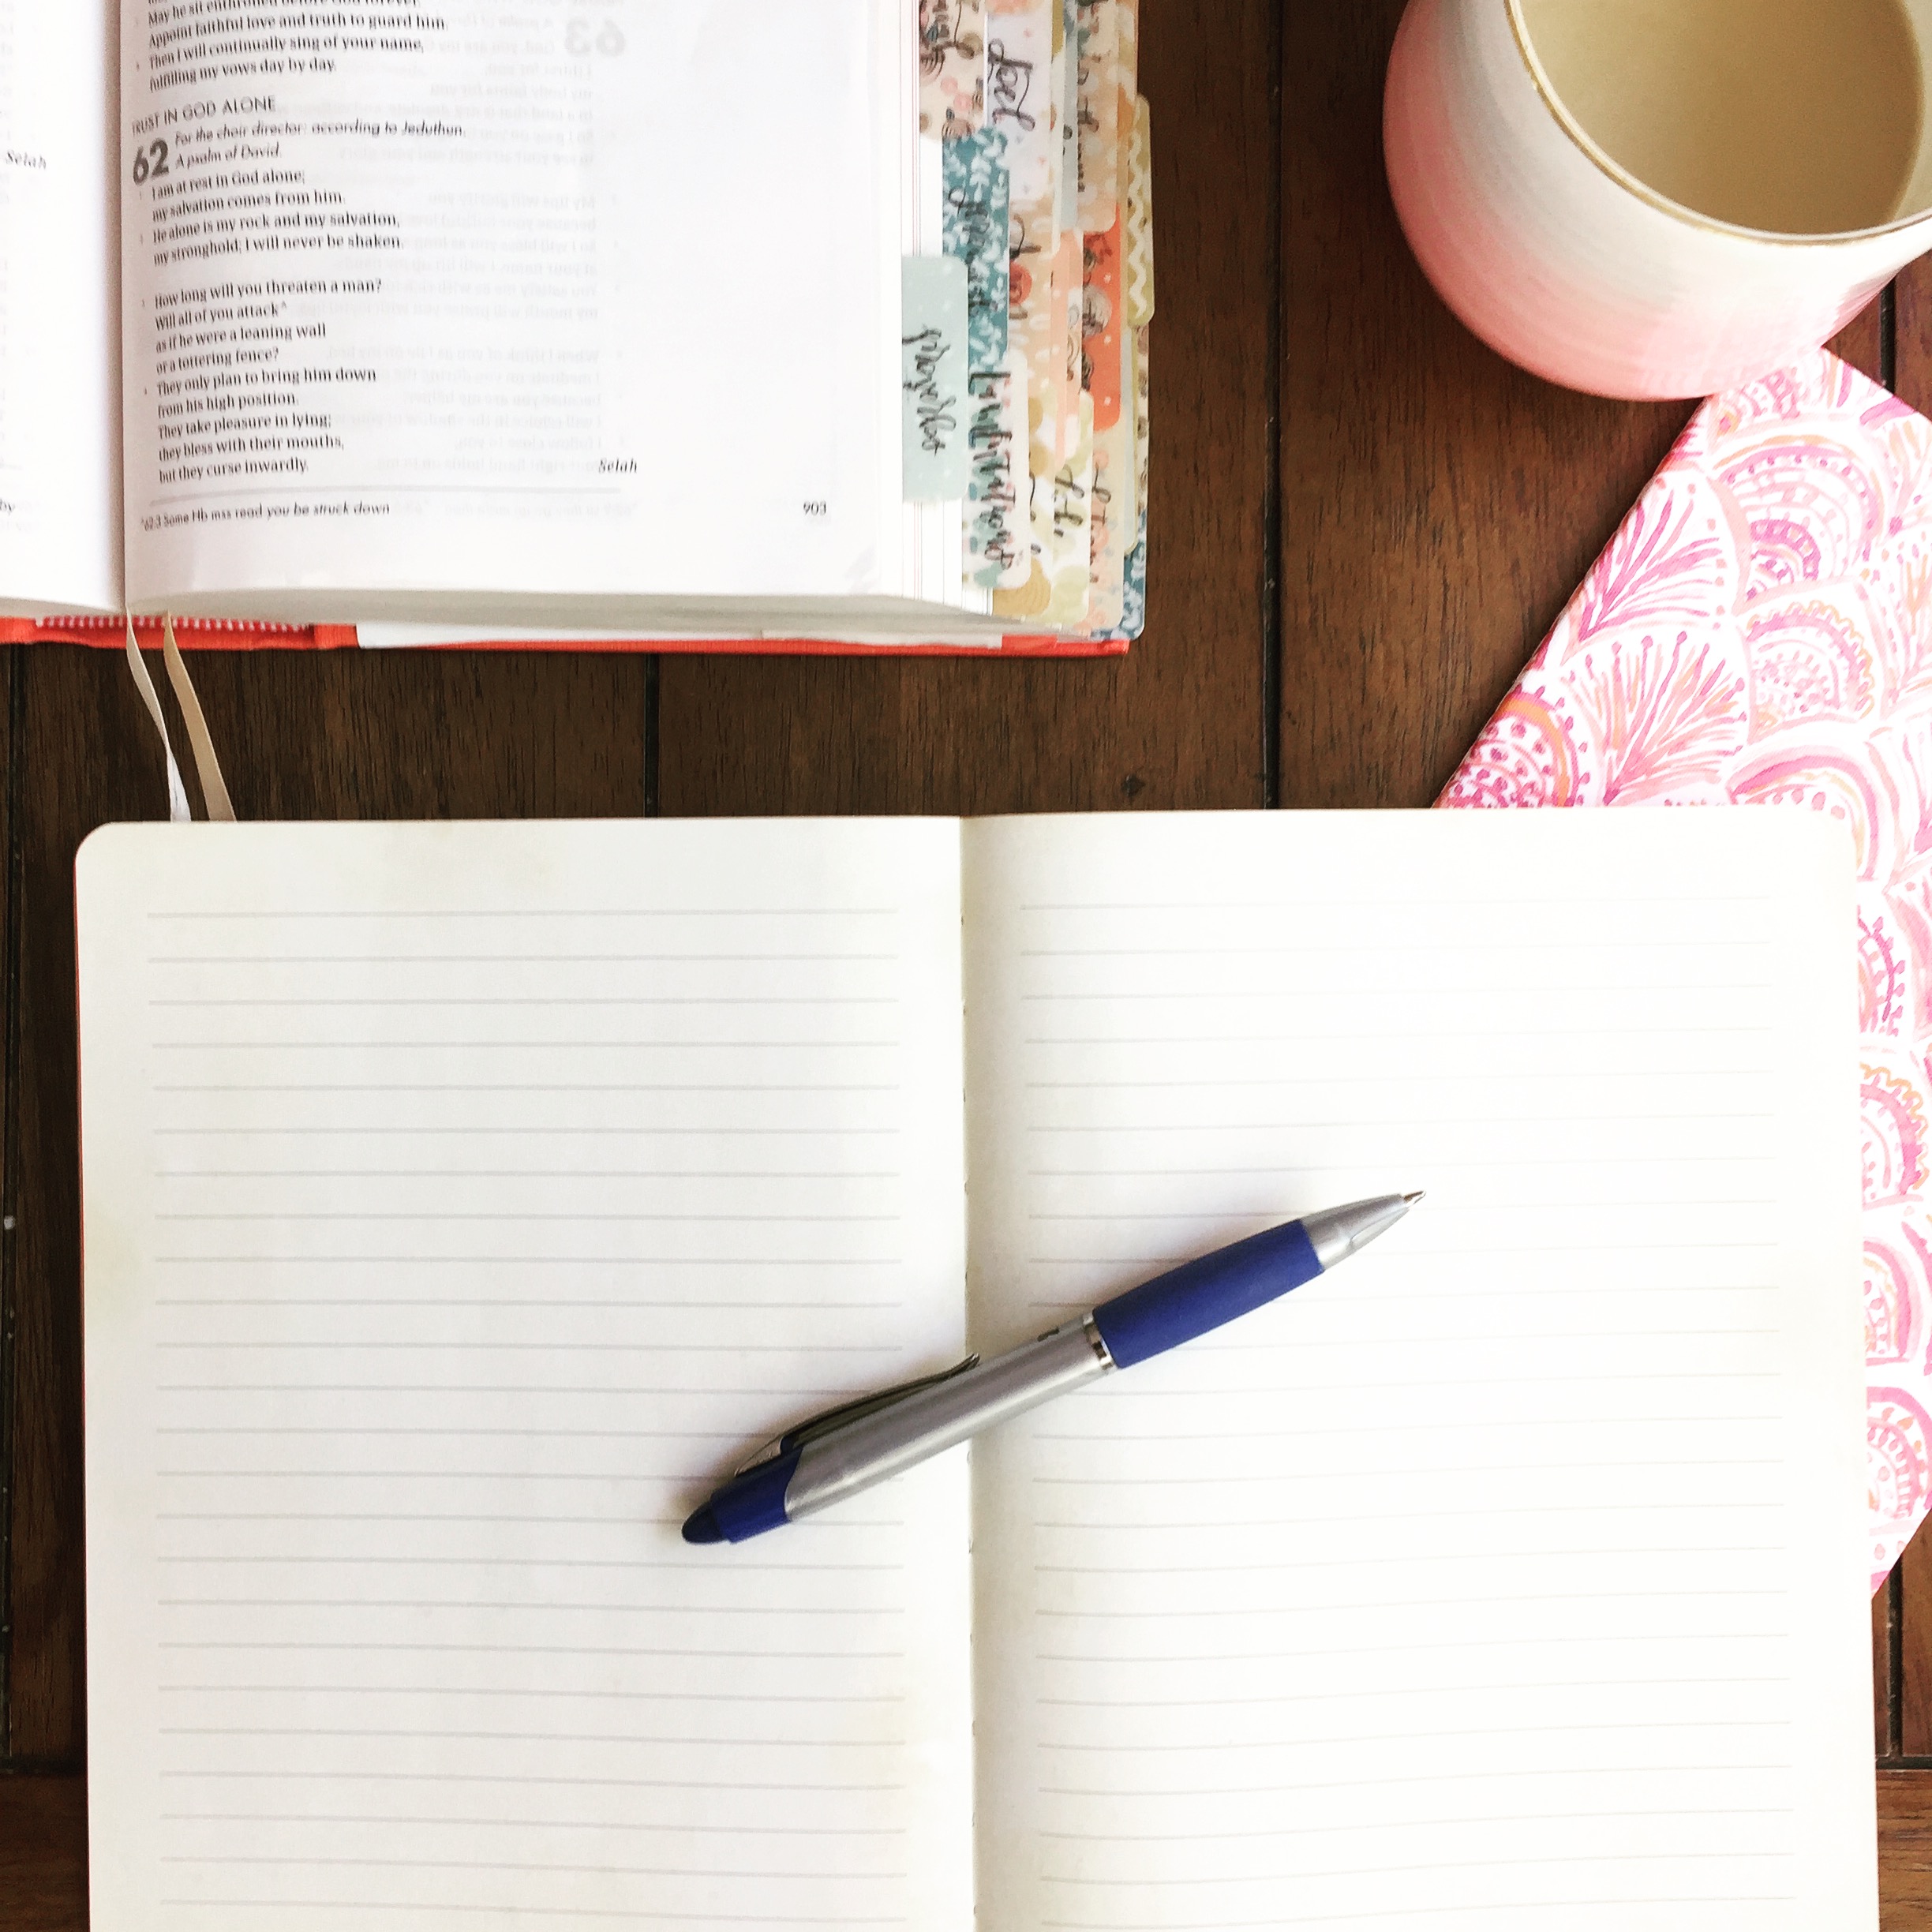 DAILY JOURNALING PROMPTS TO HELP YOU CONNECT WITH GOD